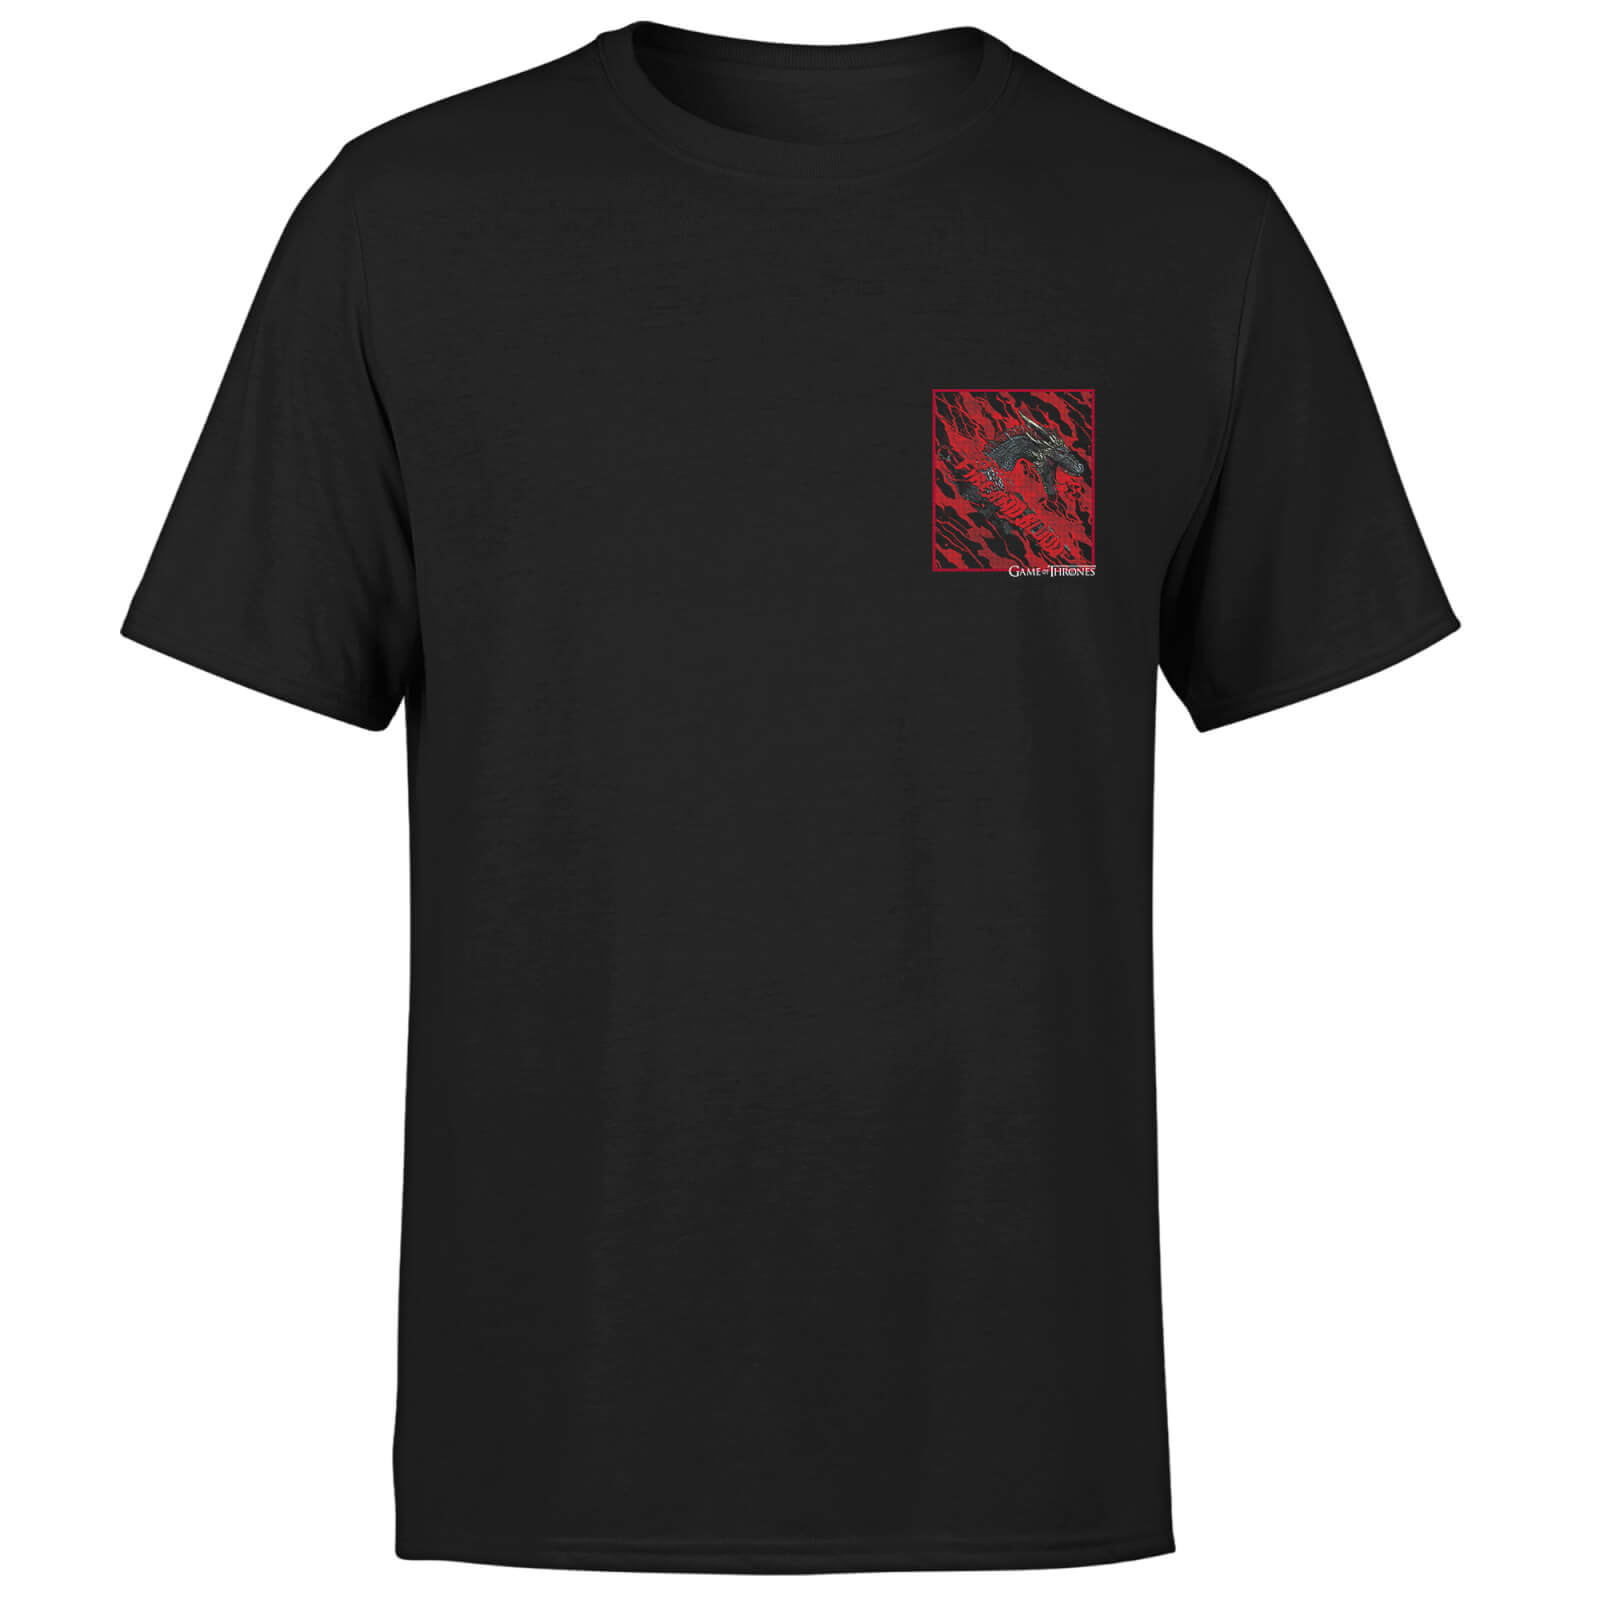 Game of Thrones Fire And Blood Men's T-Shirt - Black - S - Schwarz